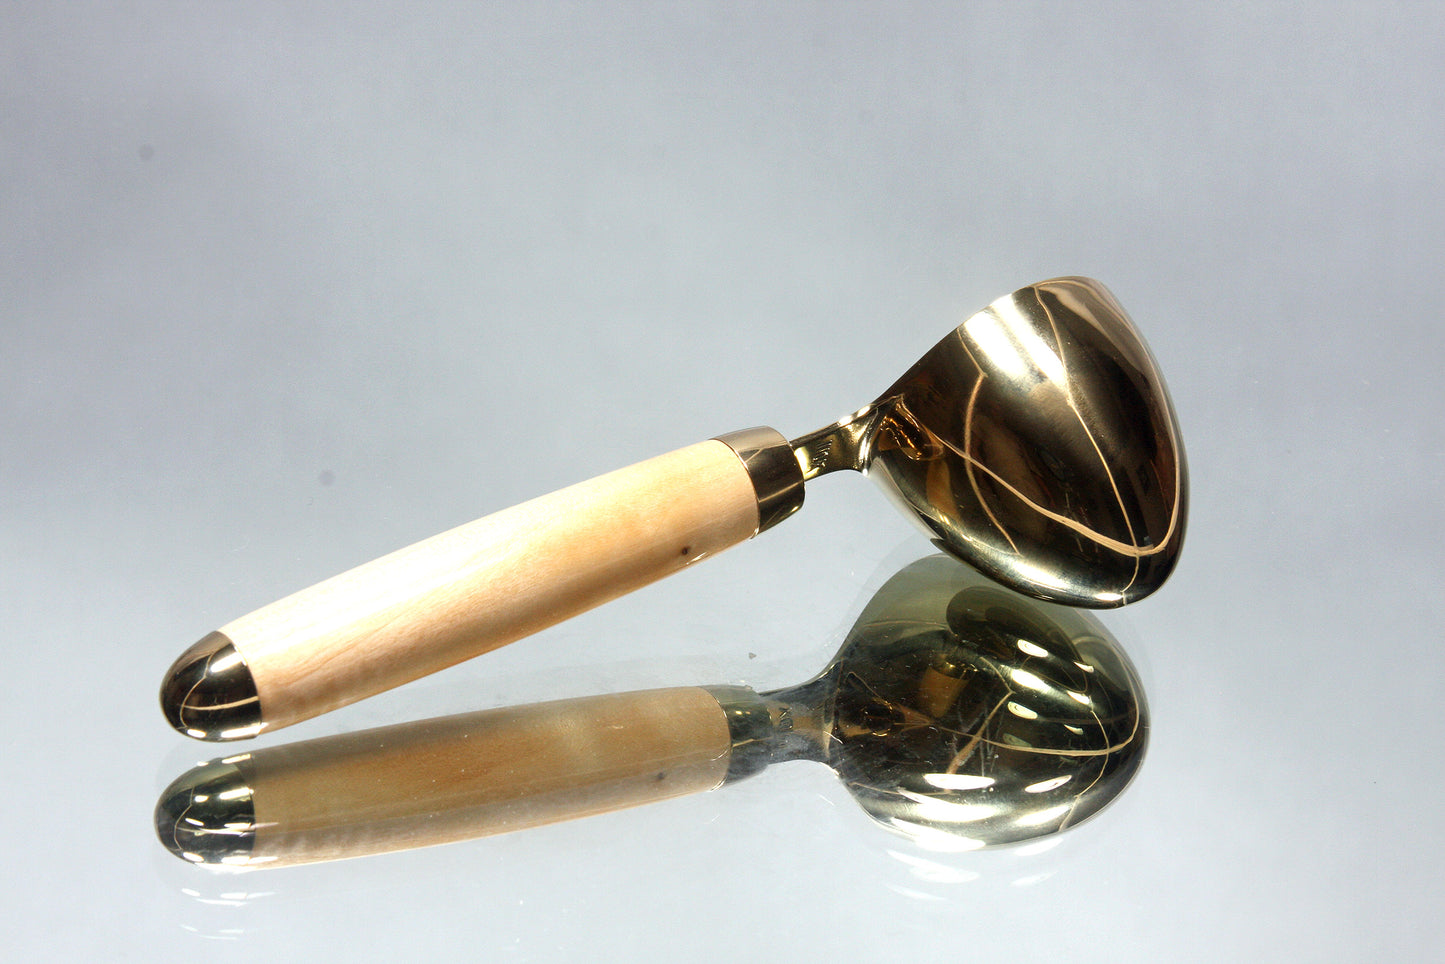 Handcrafted Gold TN-Plated Coffee Scoop - 2oz Capacity - Cottonwood Handle